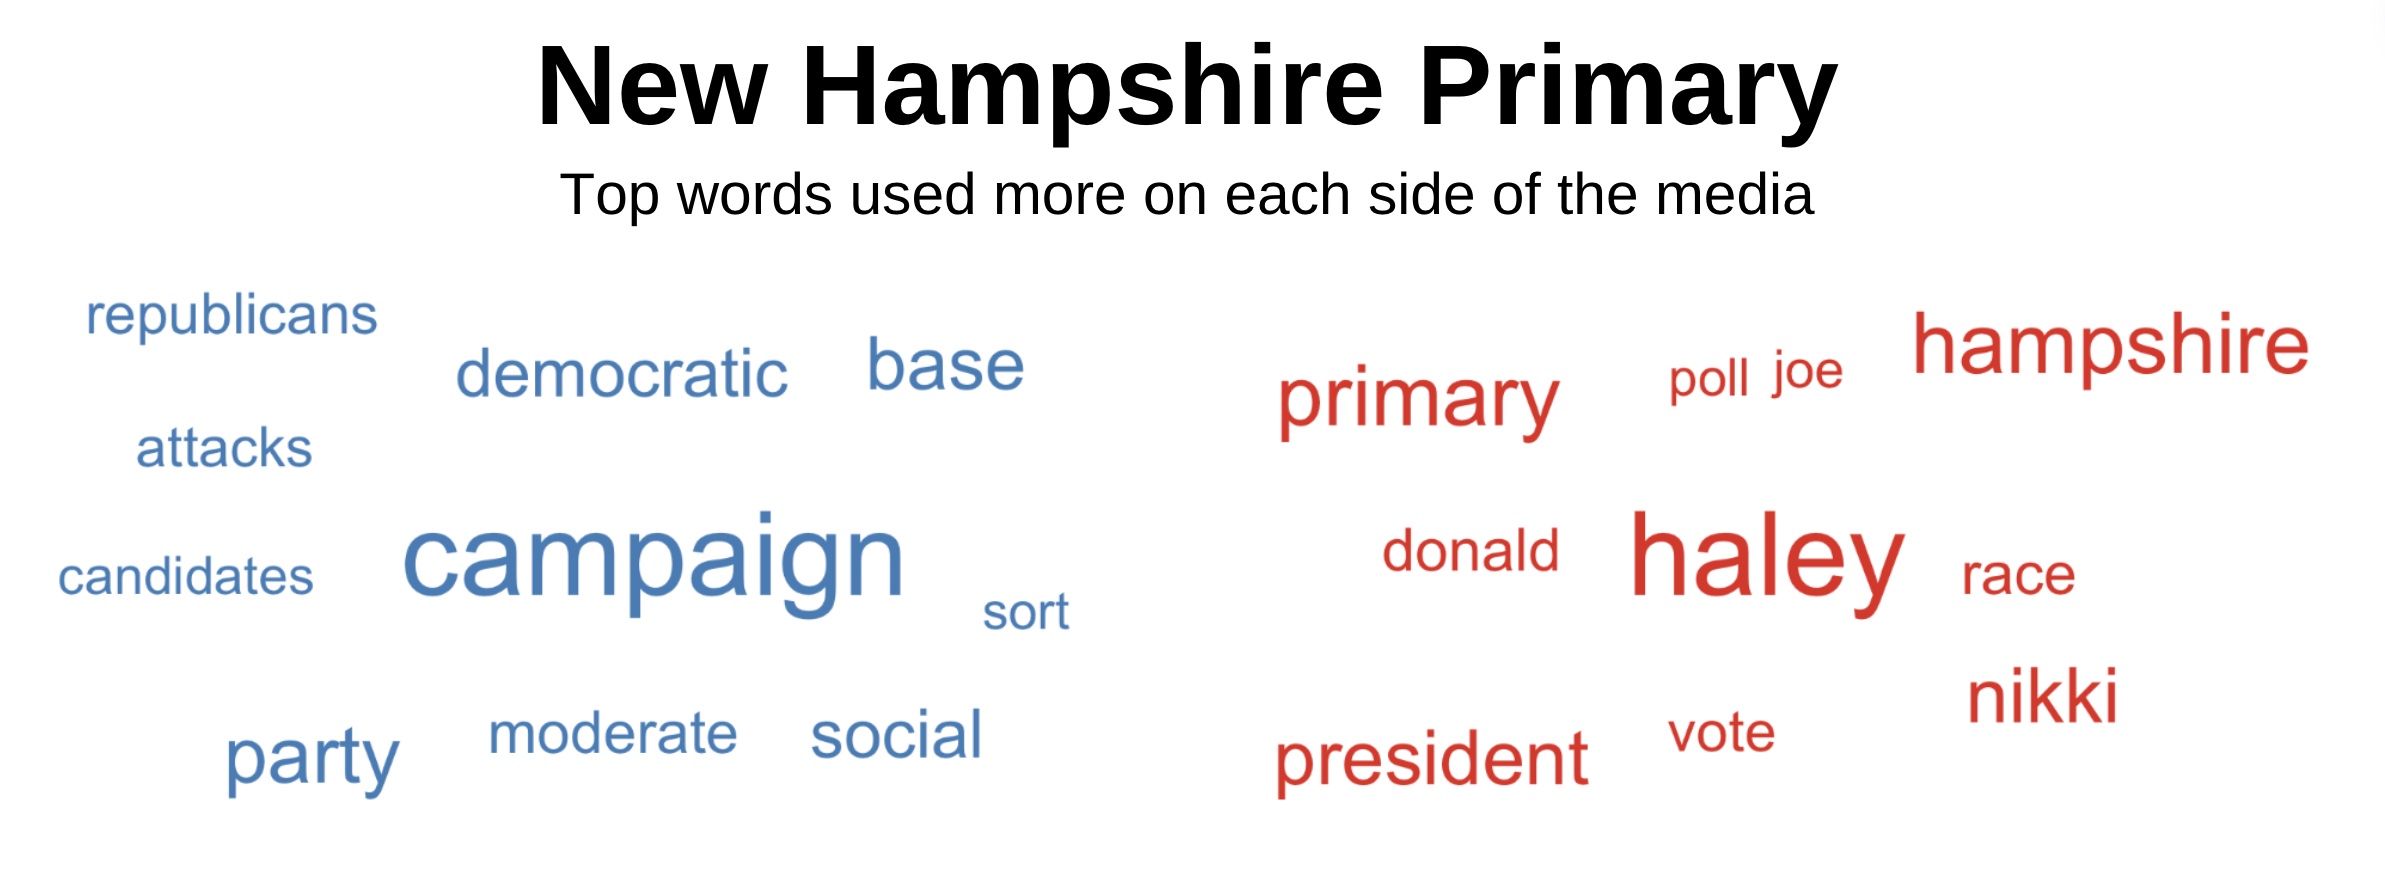 Top words about the New Hampshire primary used more on each side of the media.